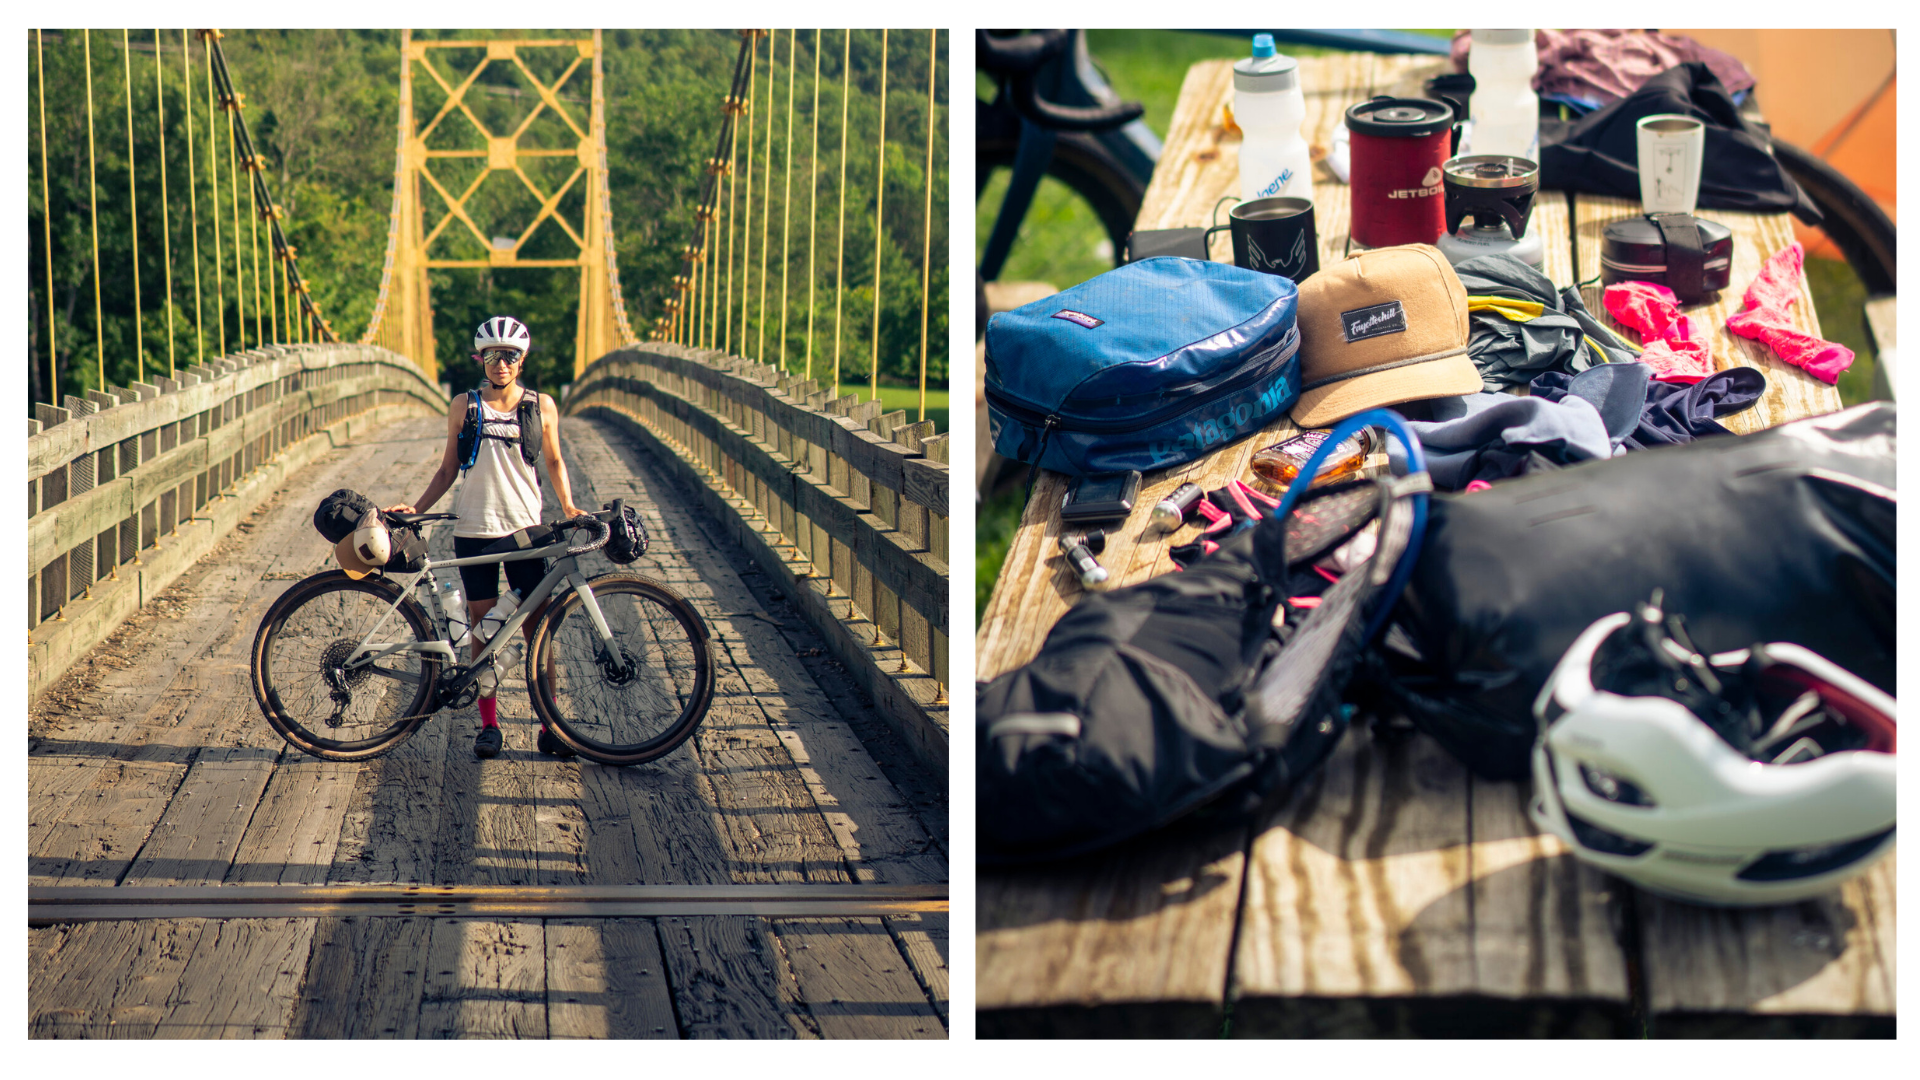 Collage with a picture of a female rider posing for a photo on a bridge, and a photo of gathered camping gear